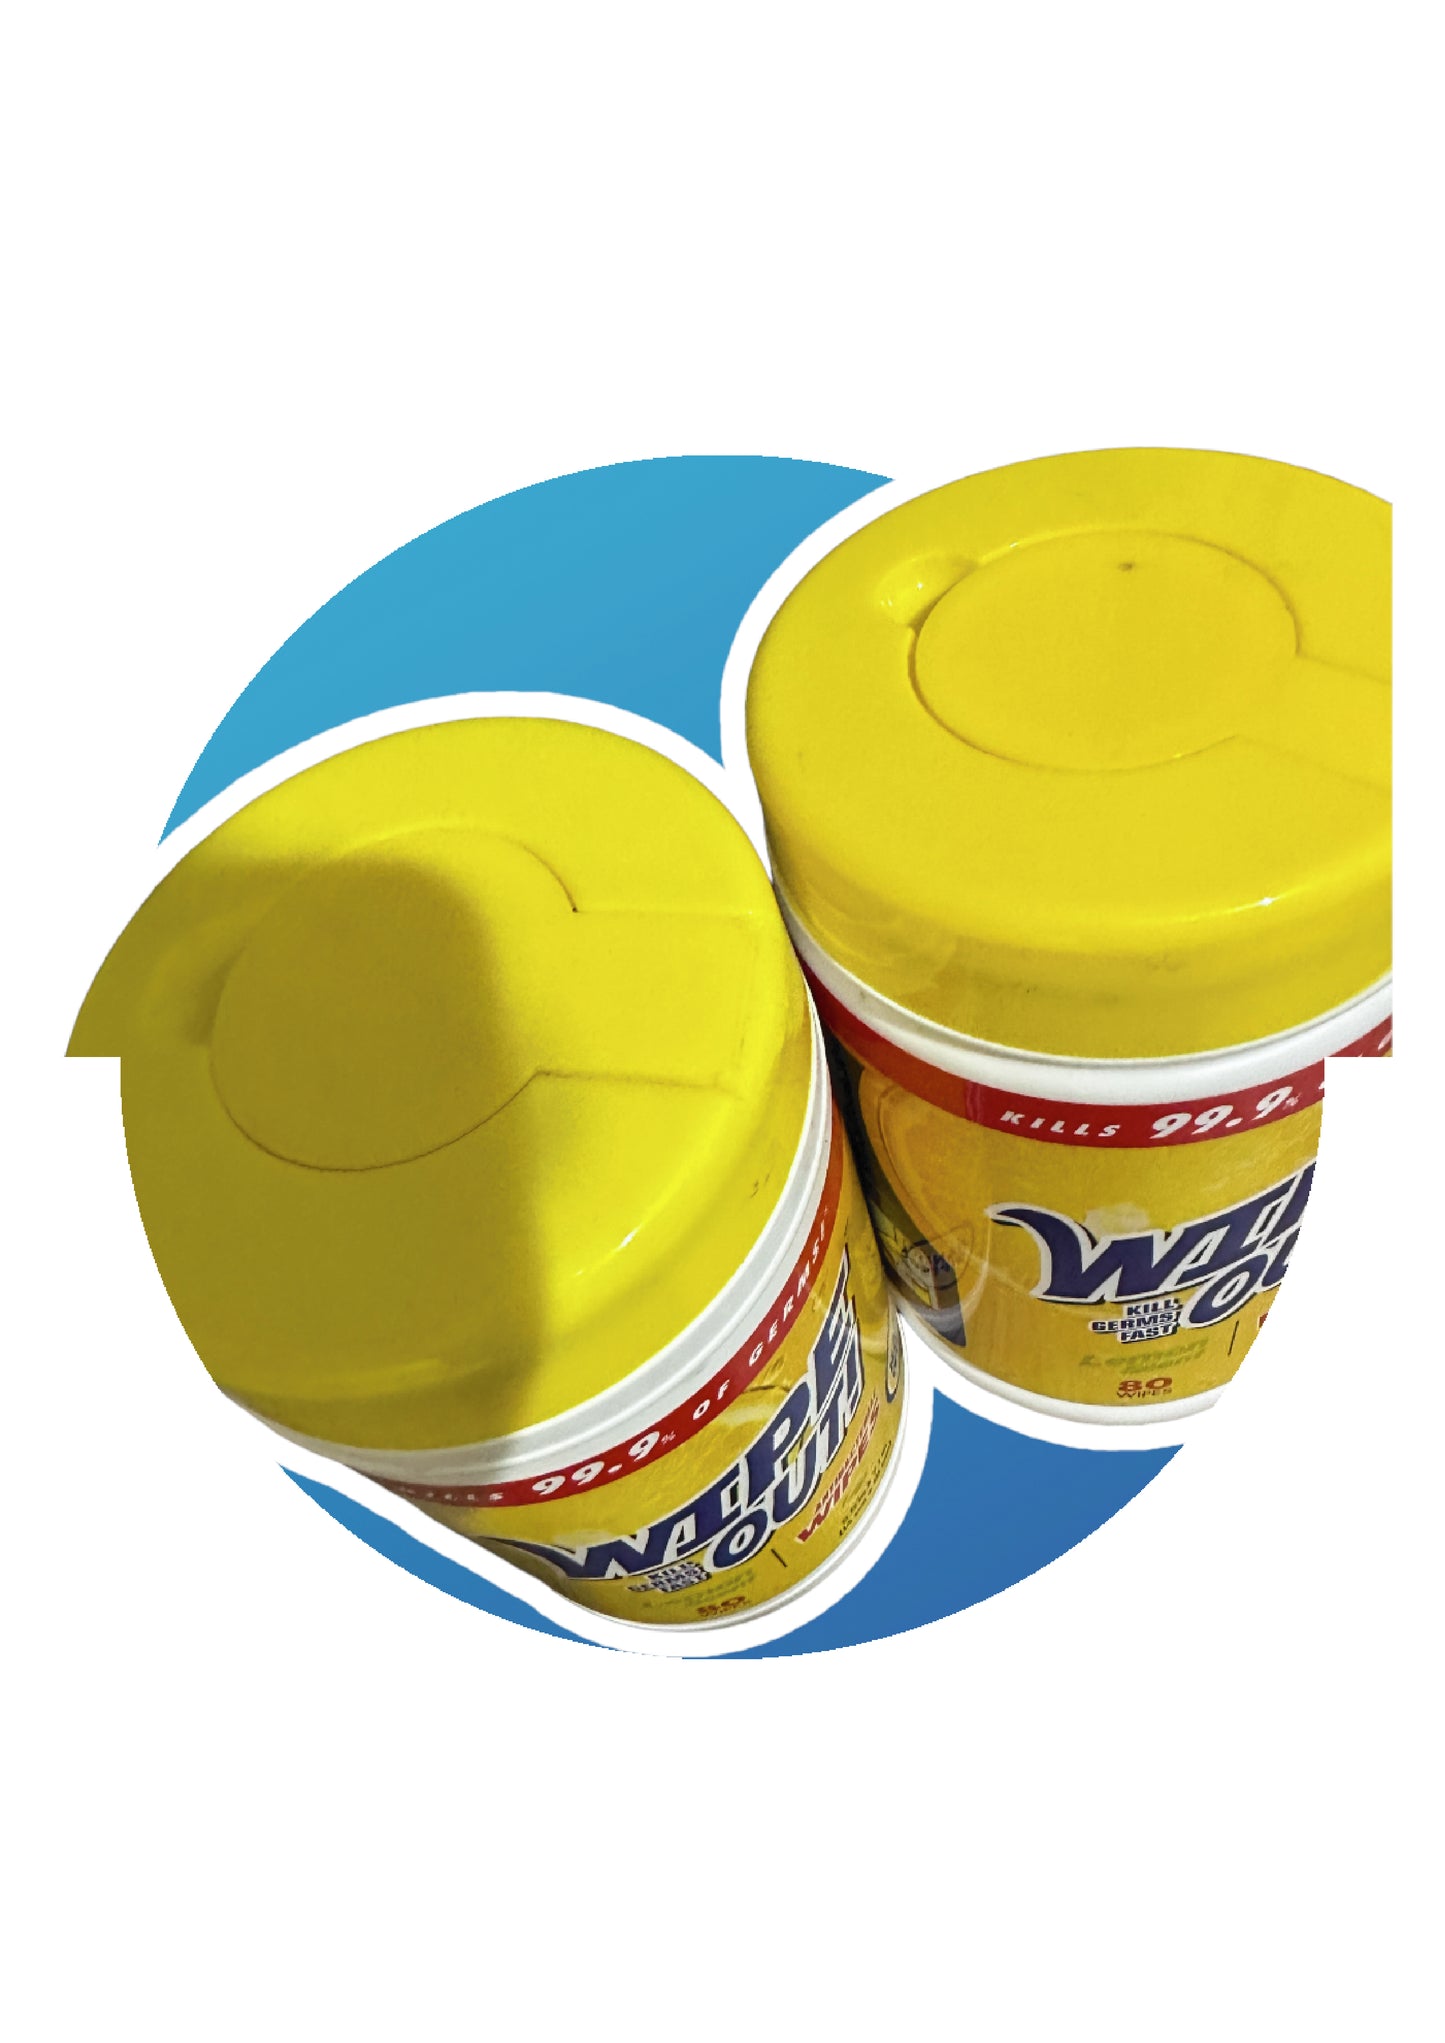 Disinfectant Wipes by Wipe Out